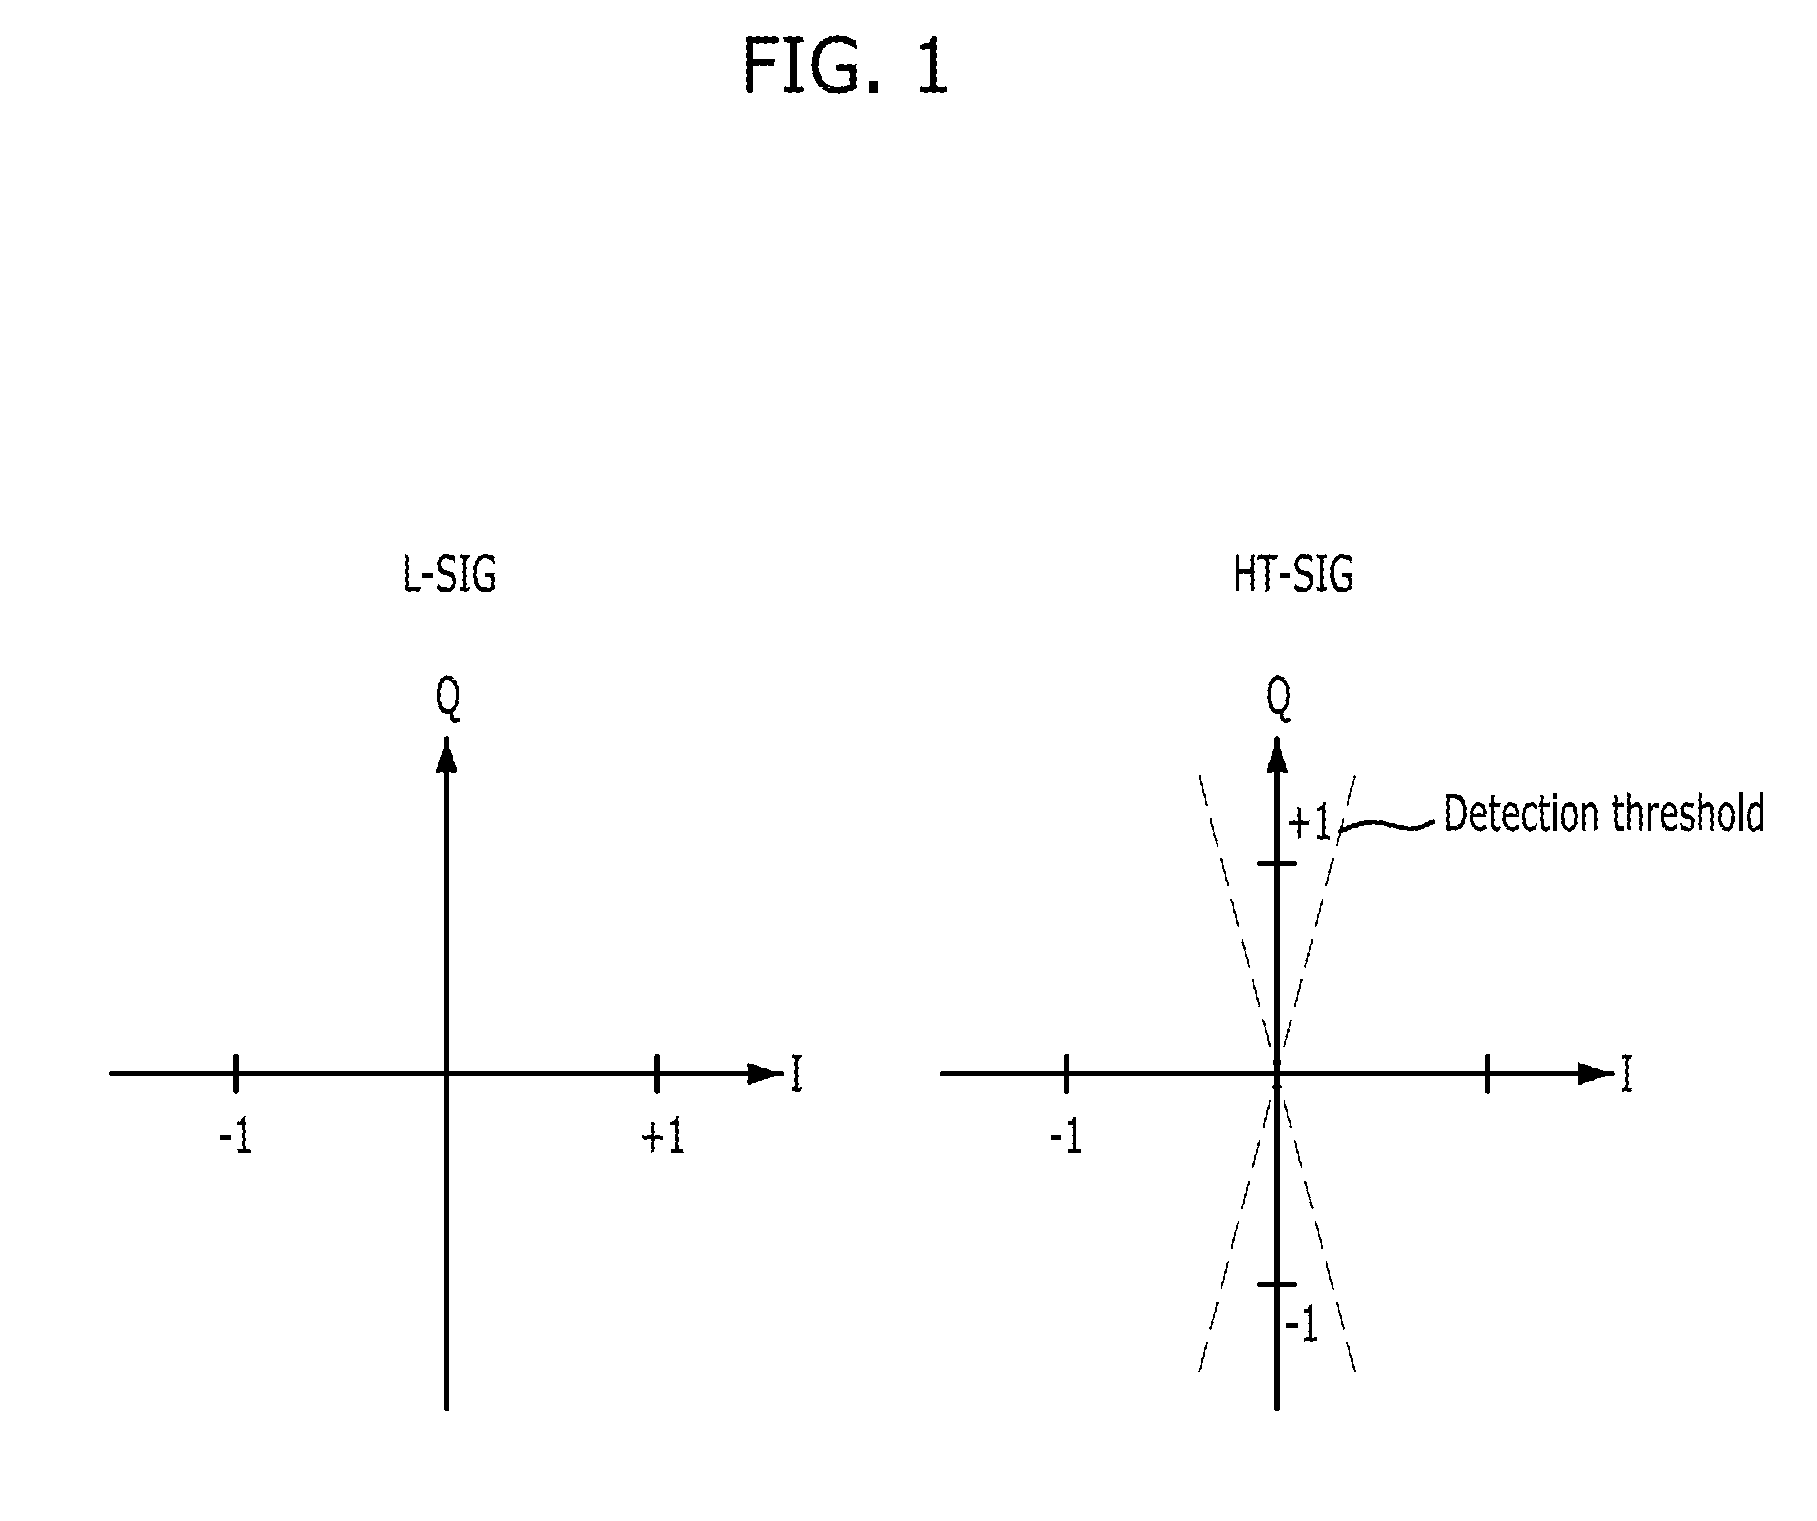 Packet mode auto-detection in multi-mode wireless communication system, signal field transmission for the packet mode auto-detection, and gain control based on the packet mode